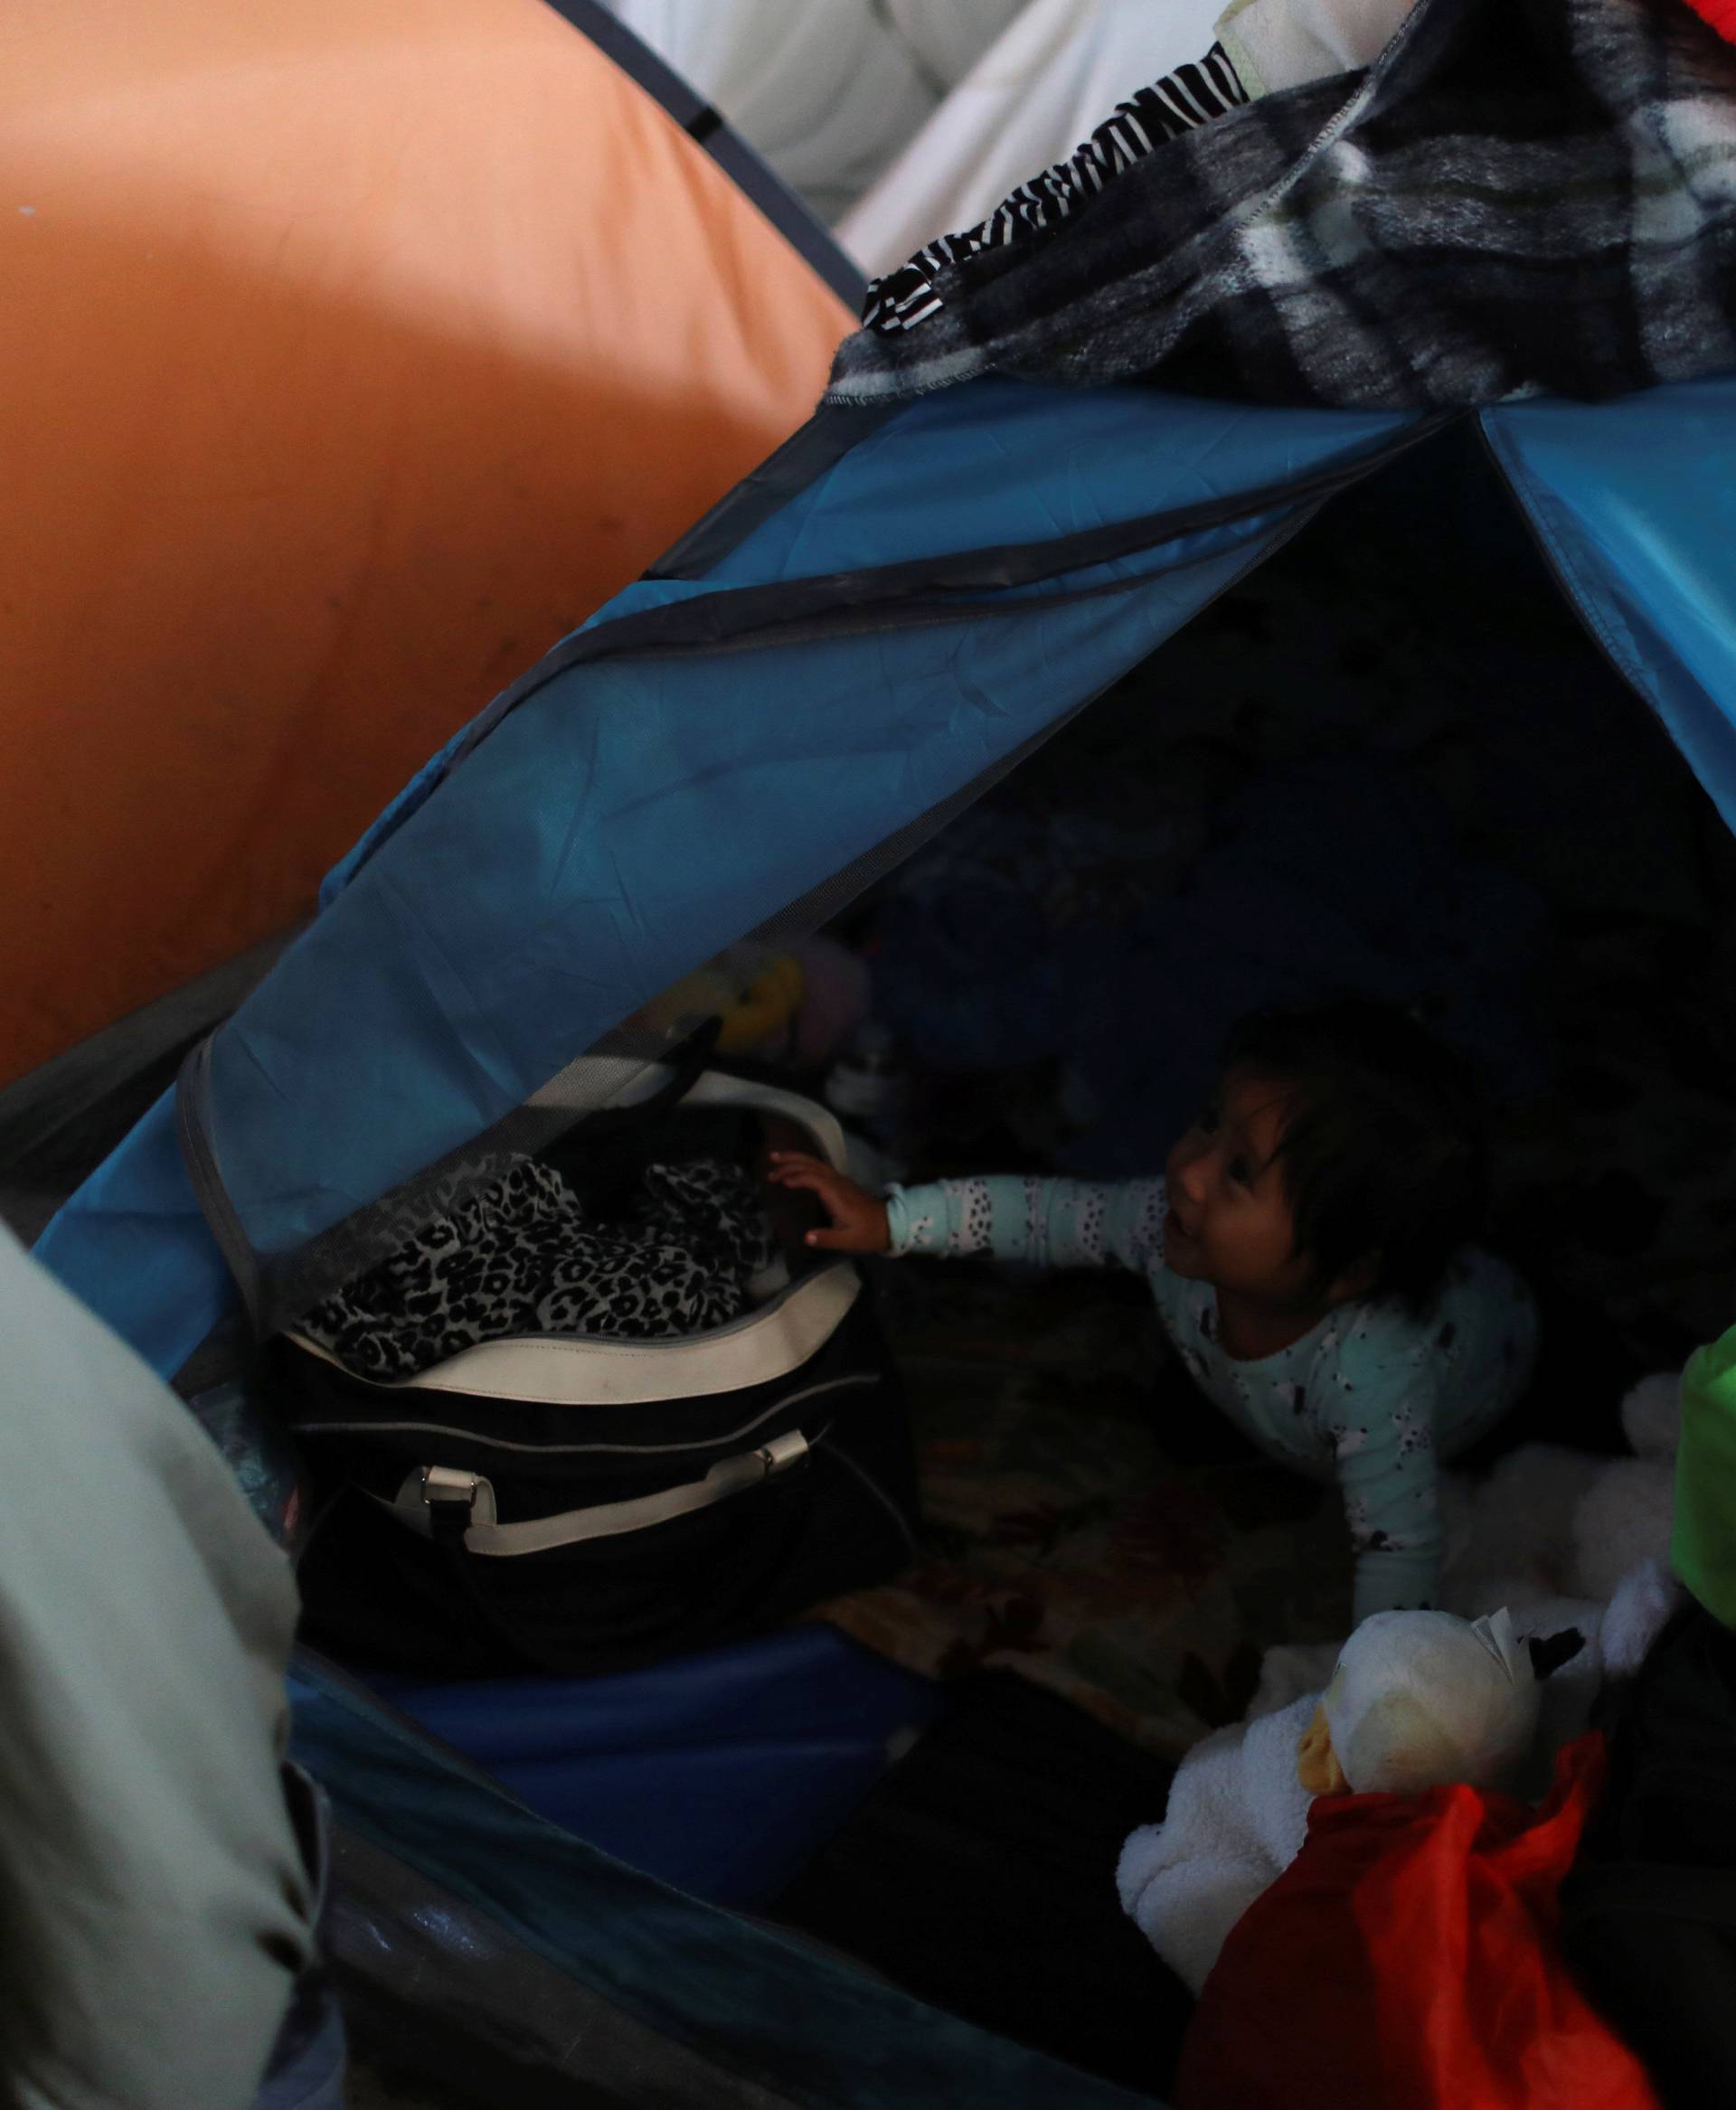 A child, who is part of the Central American migrants moving in a caravan through Mexico and travelling to request asylum in the U.S., is seen inside a tent at a shelter in Tijuana